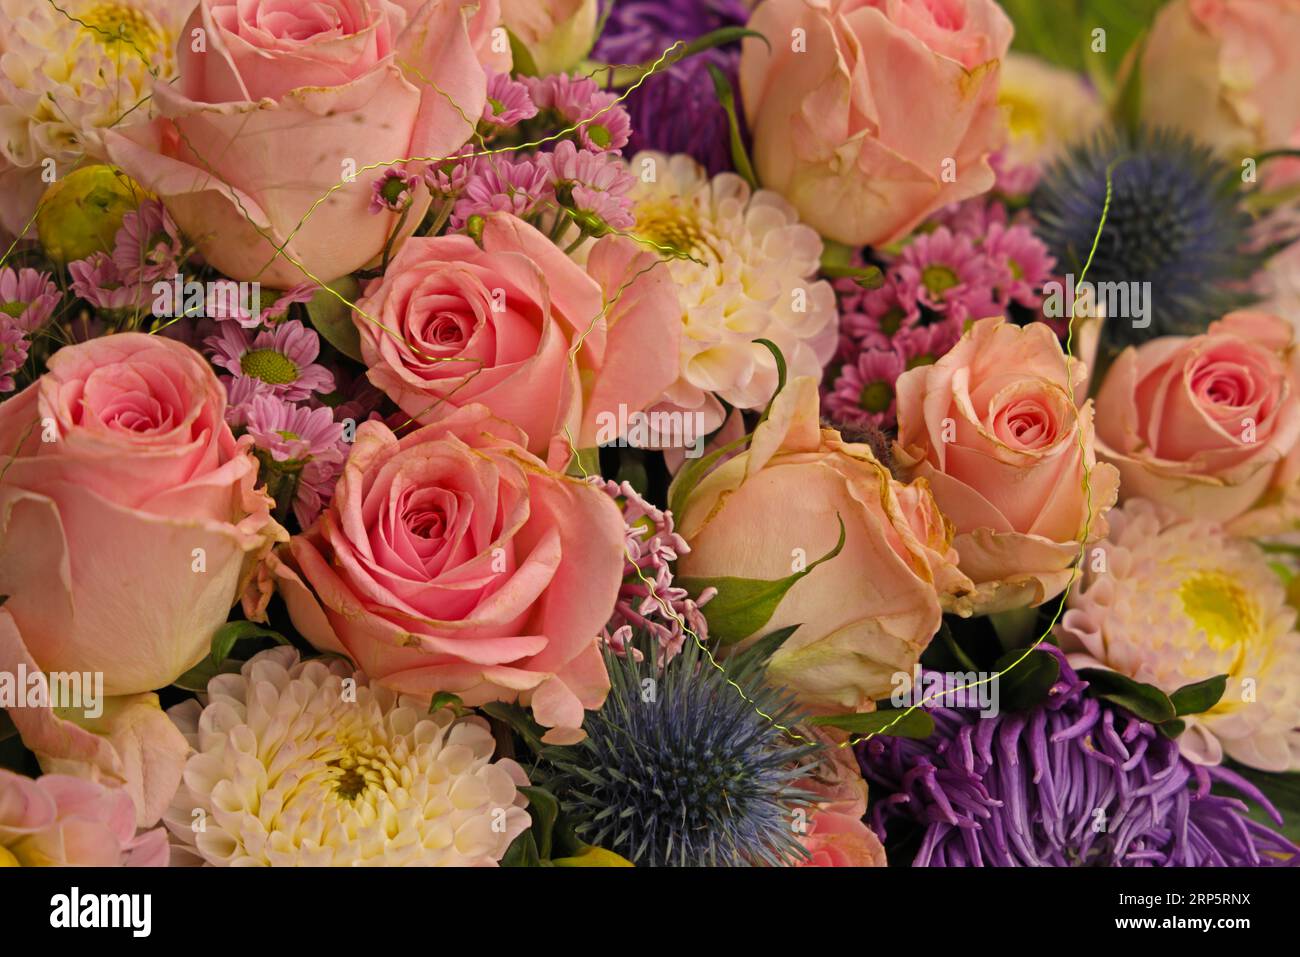 beautiful colorful flower bouquet with roses an other blooms Stock Photo